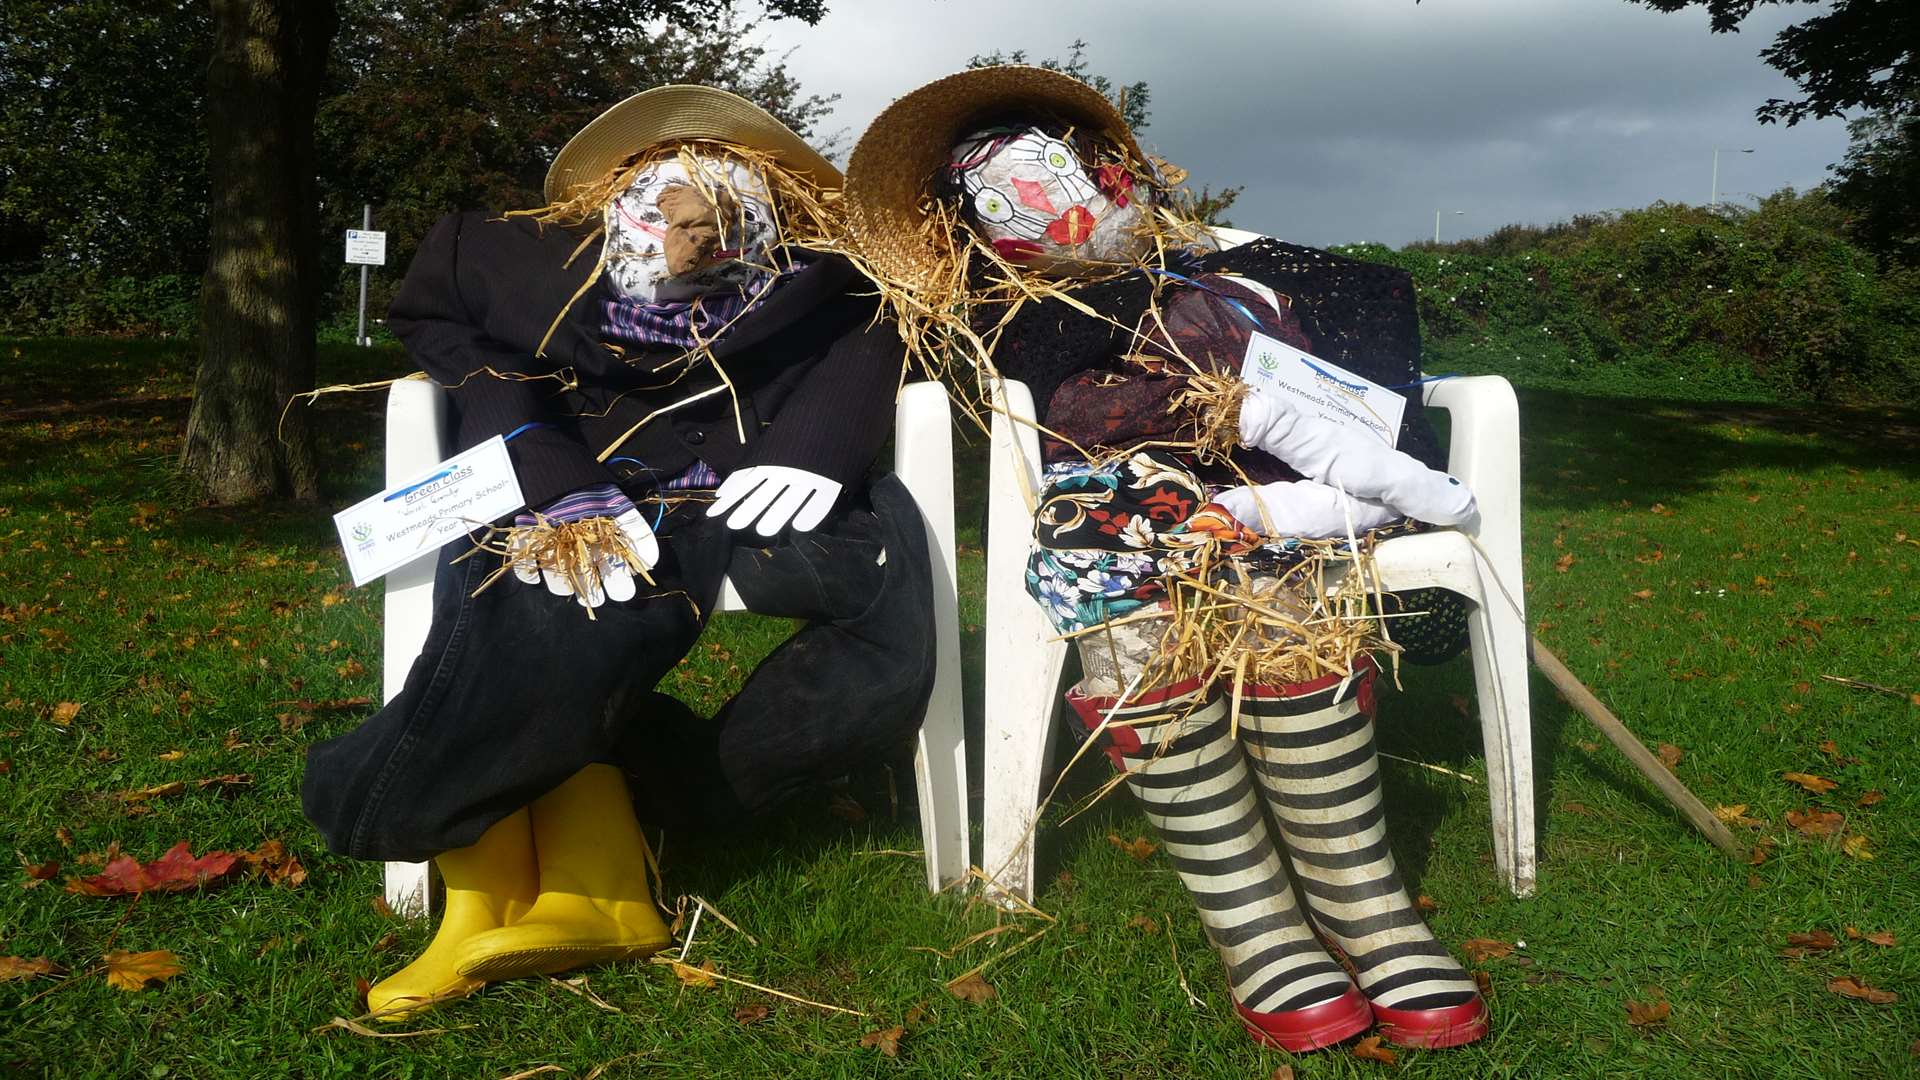 Westgate Parks is holding a Scarecrow Trail